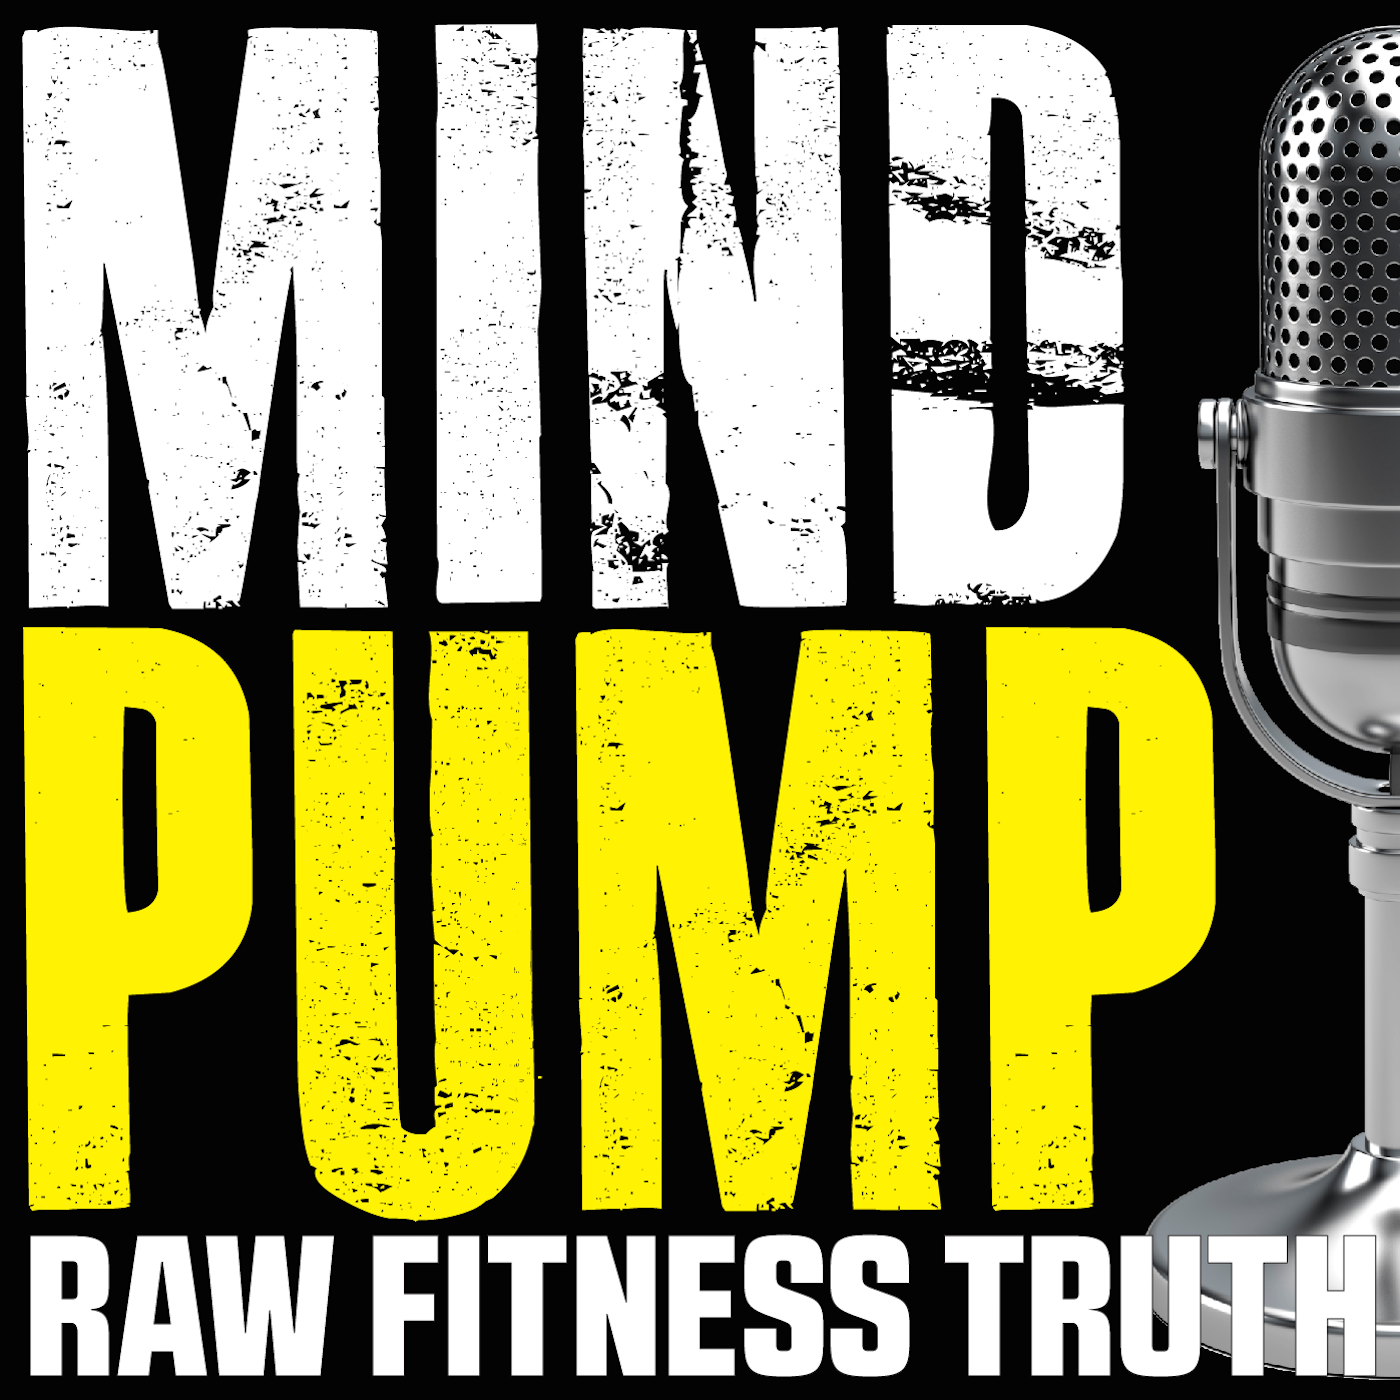 533: Building Muscle After 30, the Dangers of Coconut Oil, Minimizing Muscle Loss When Focusing on Correctional Exercises & MORE